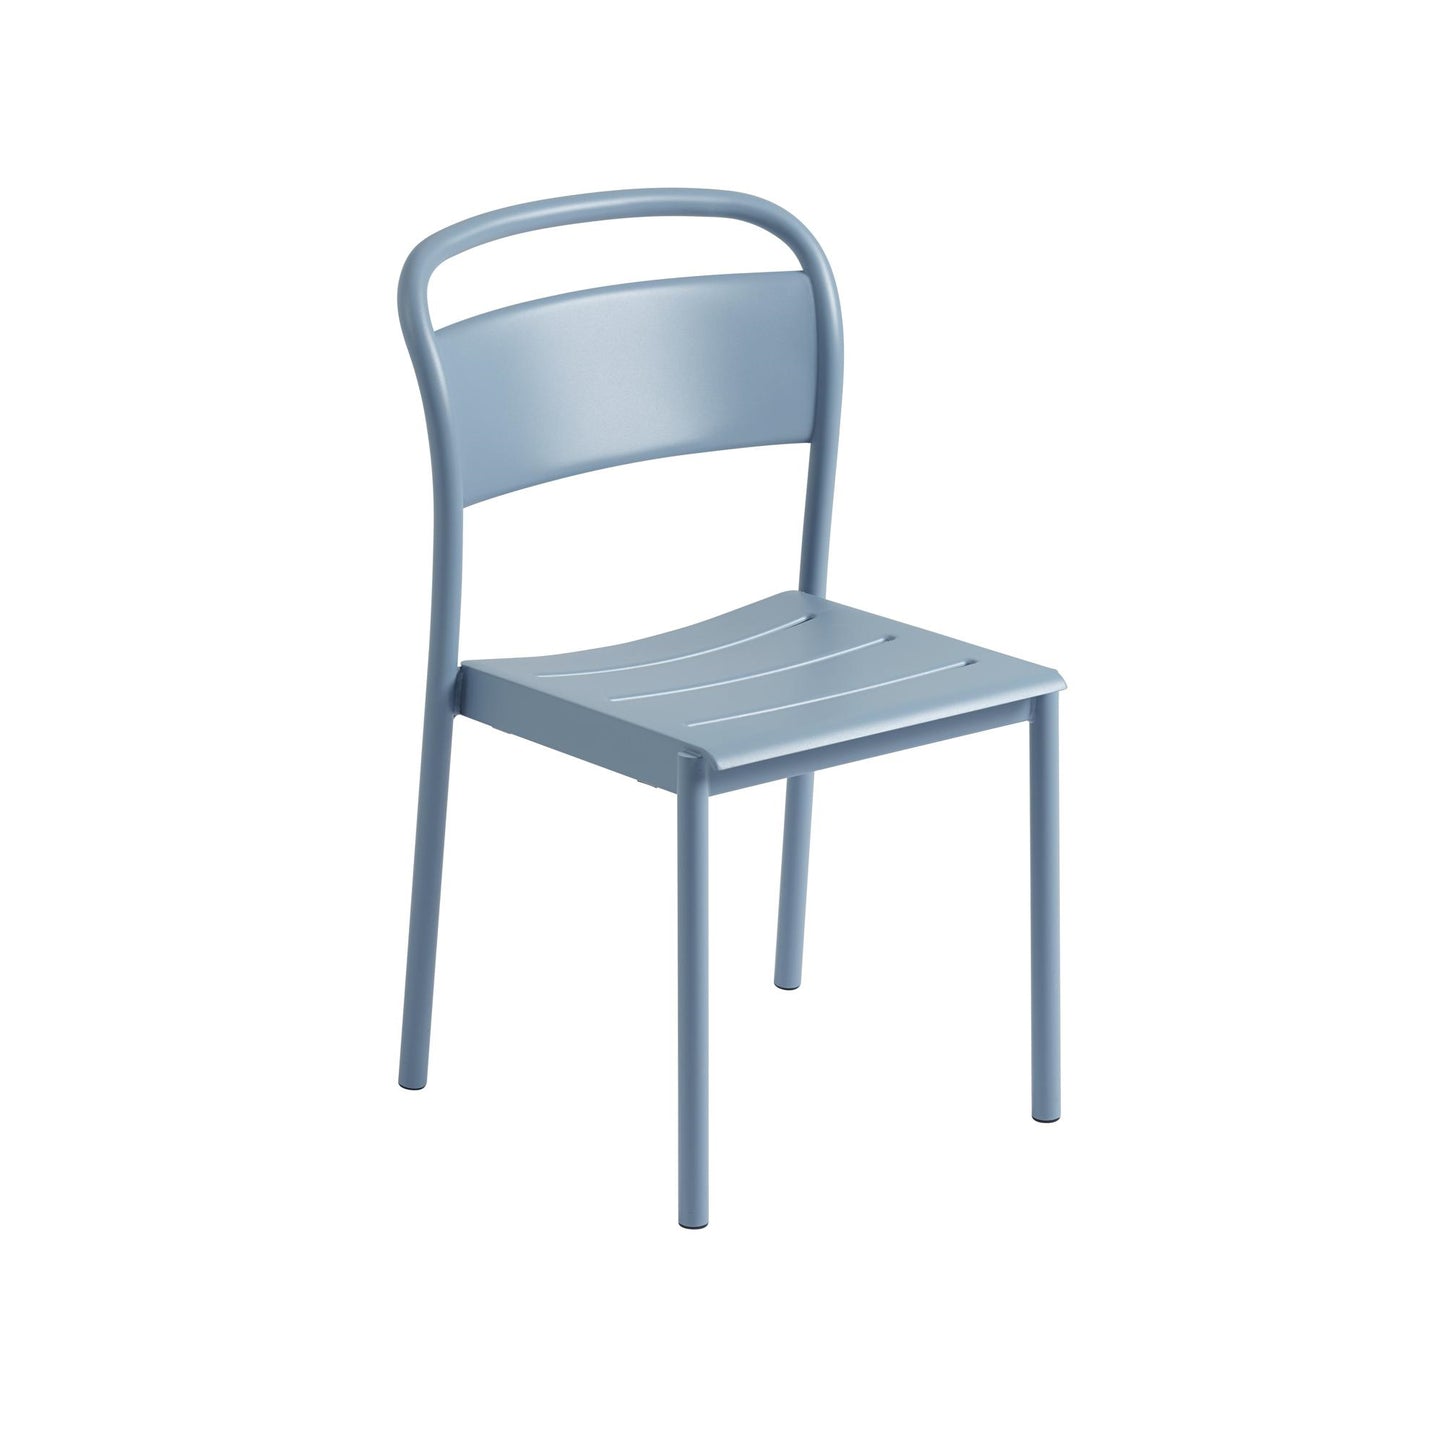 Linear Steel Dining Chair by Muuto #Pale Blue